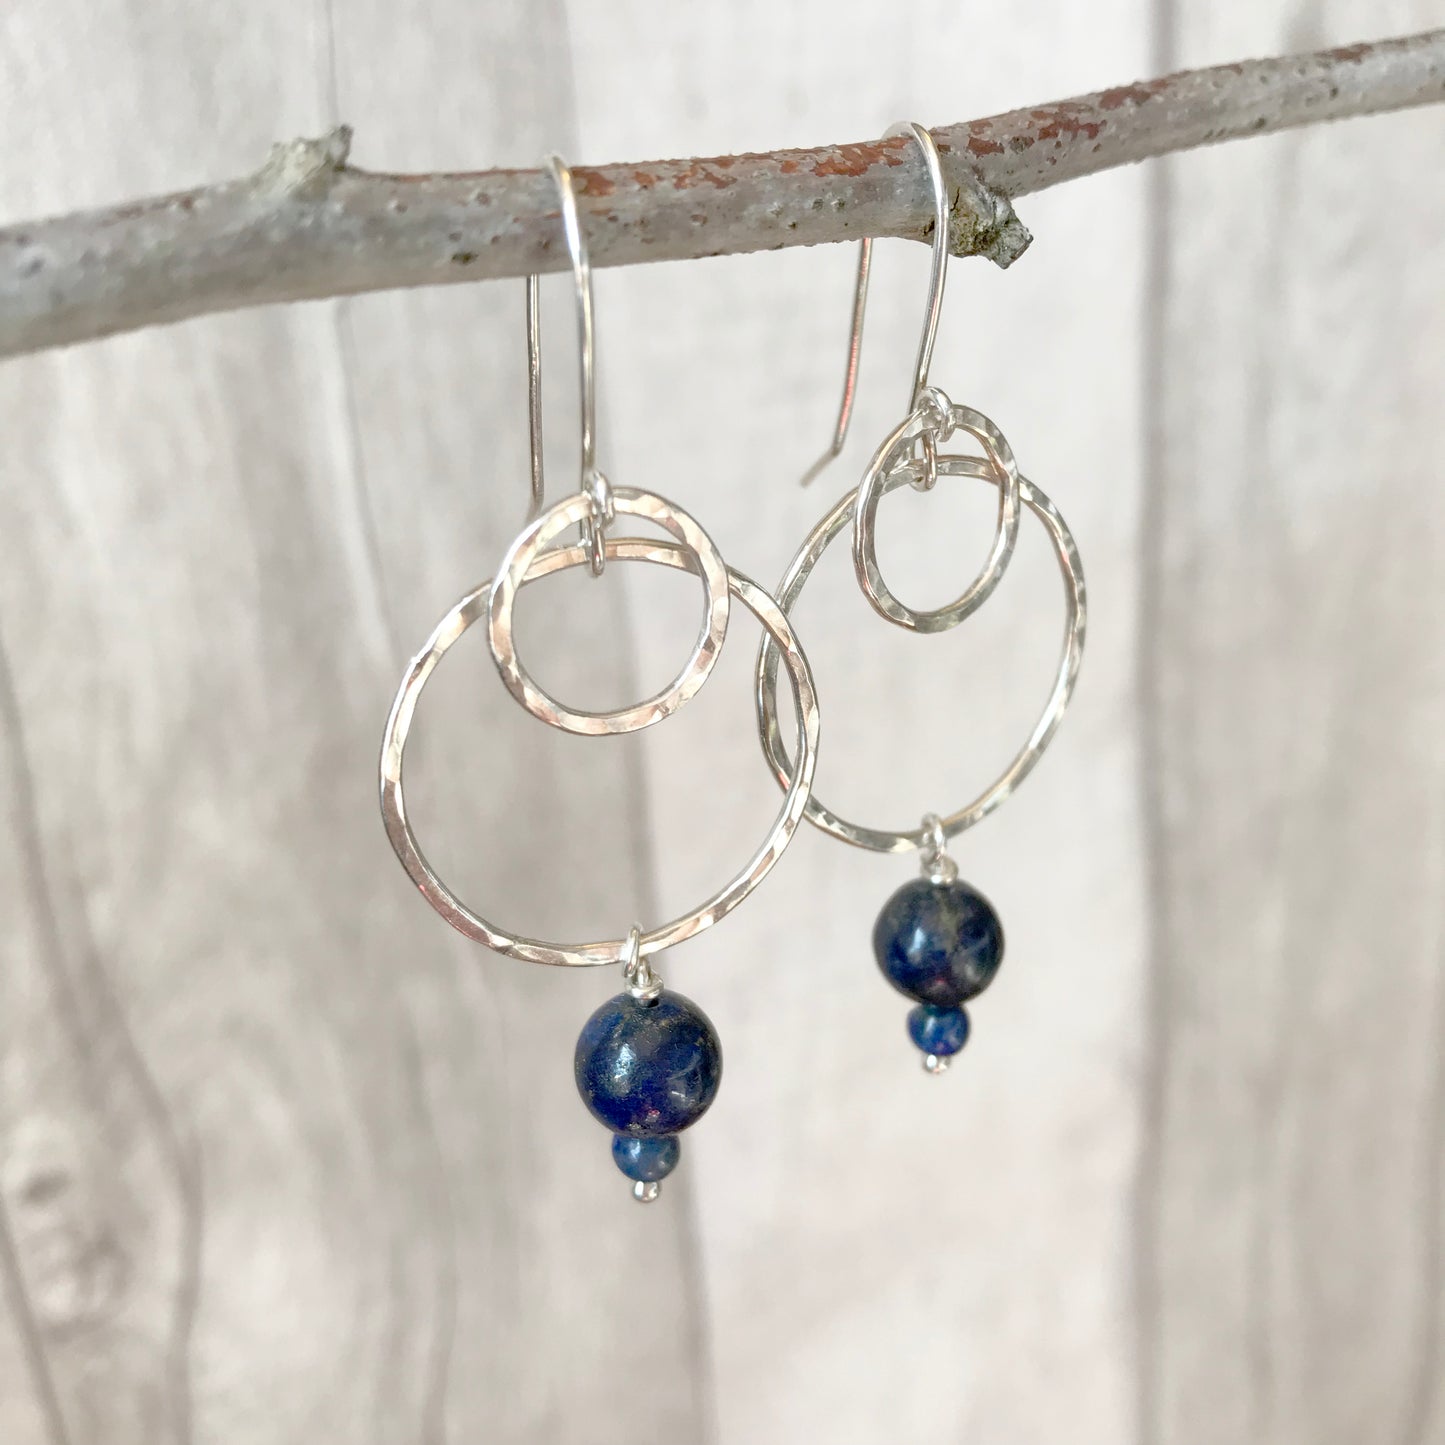 Hammered circles and Lapis Lazuli earrings